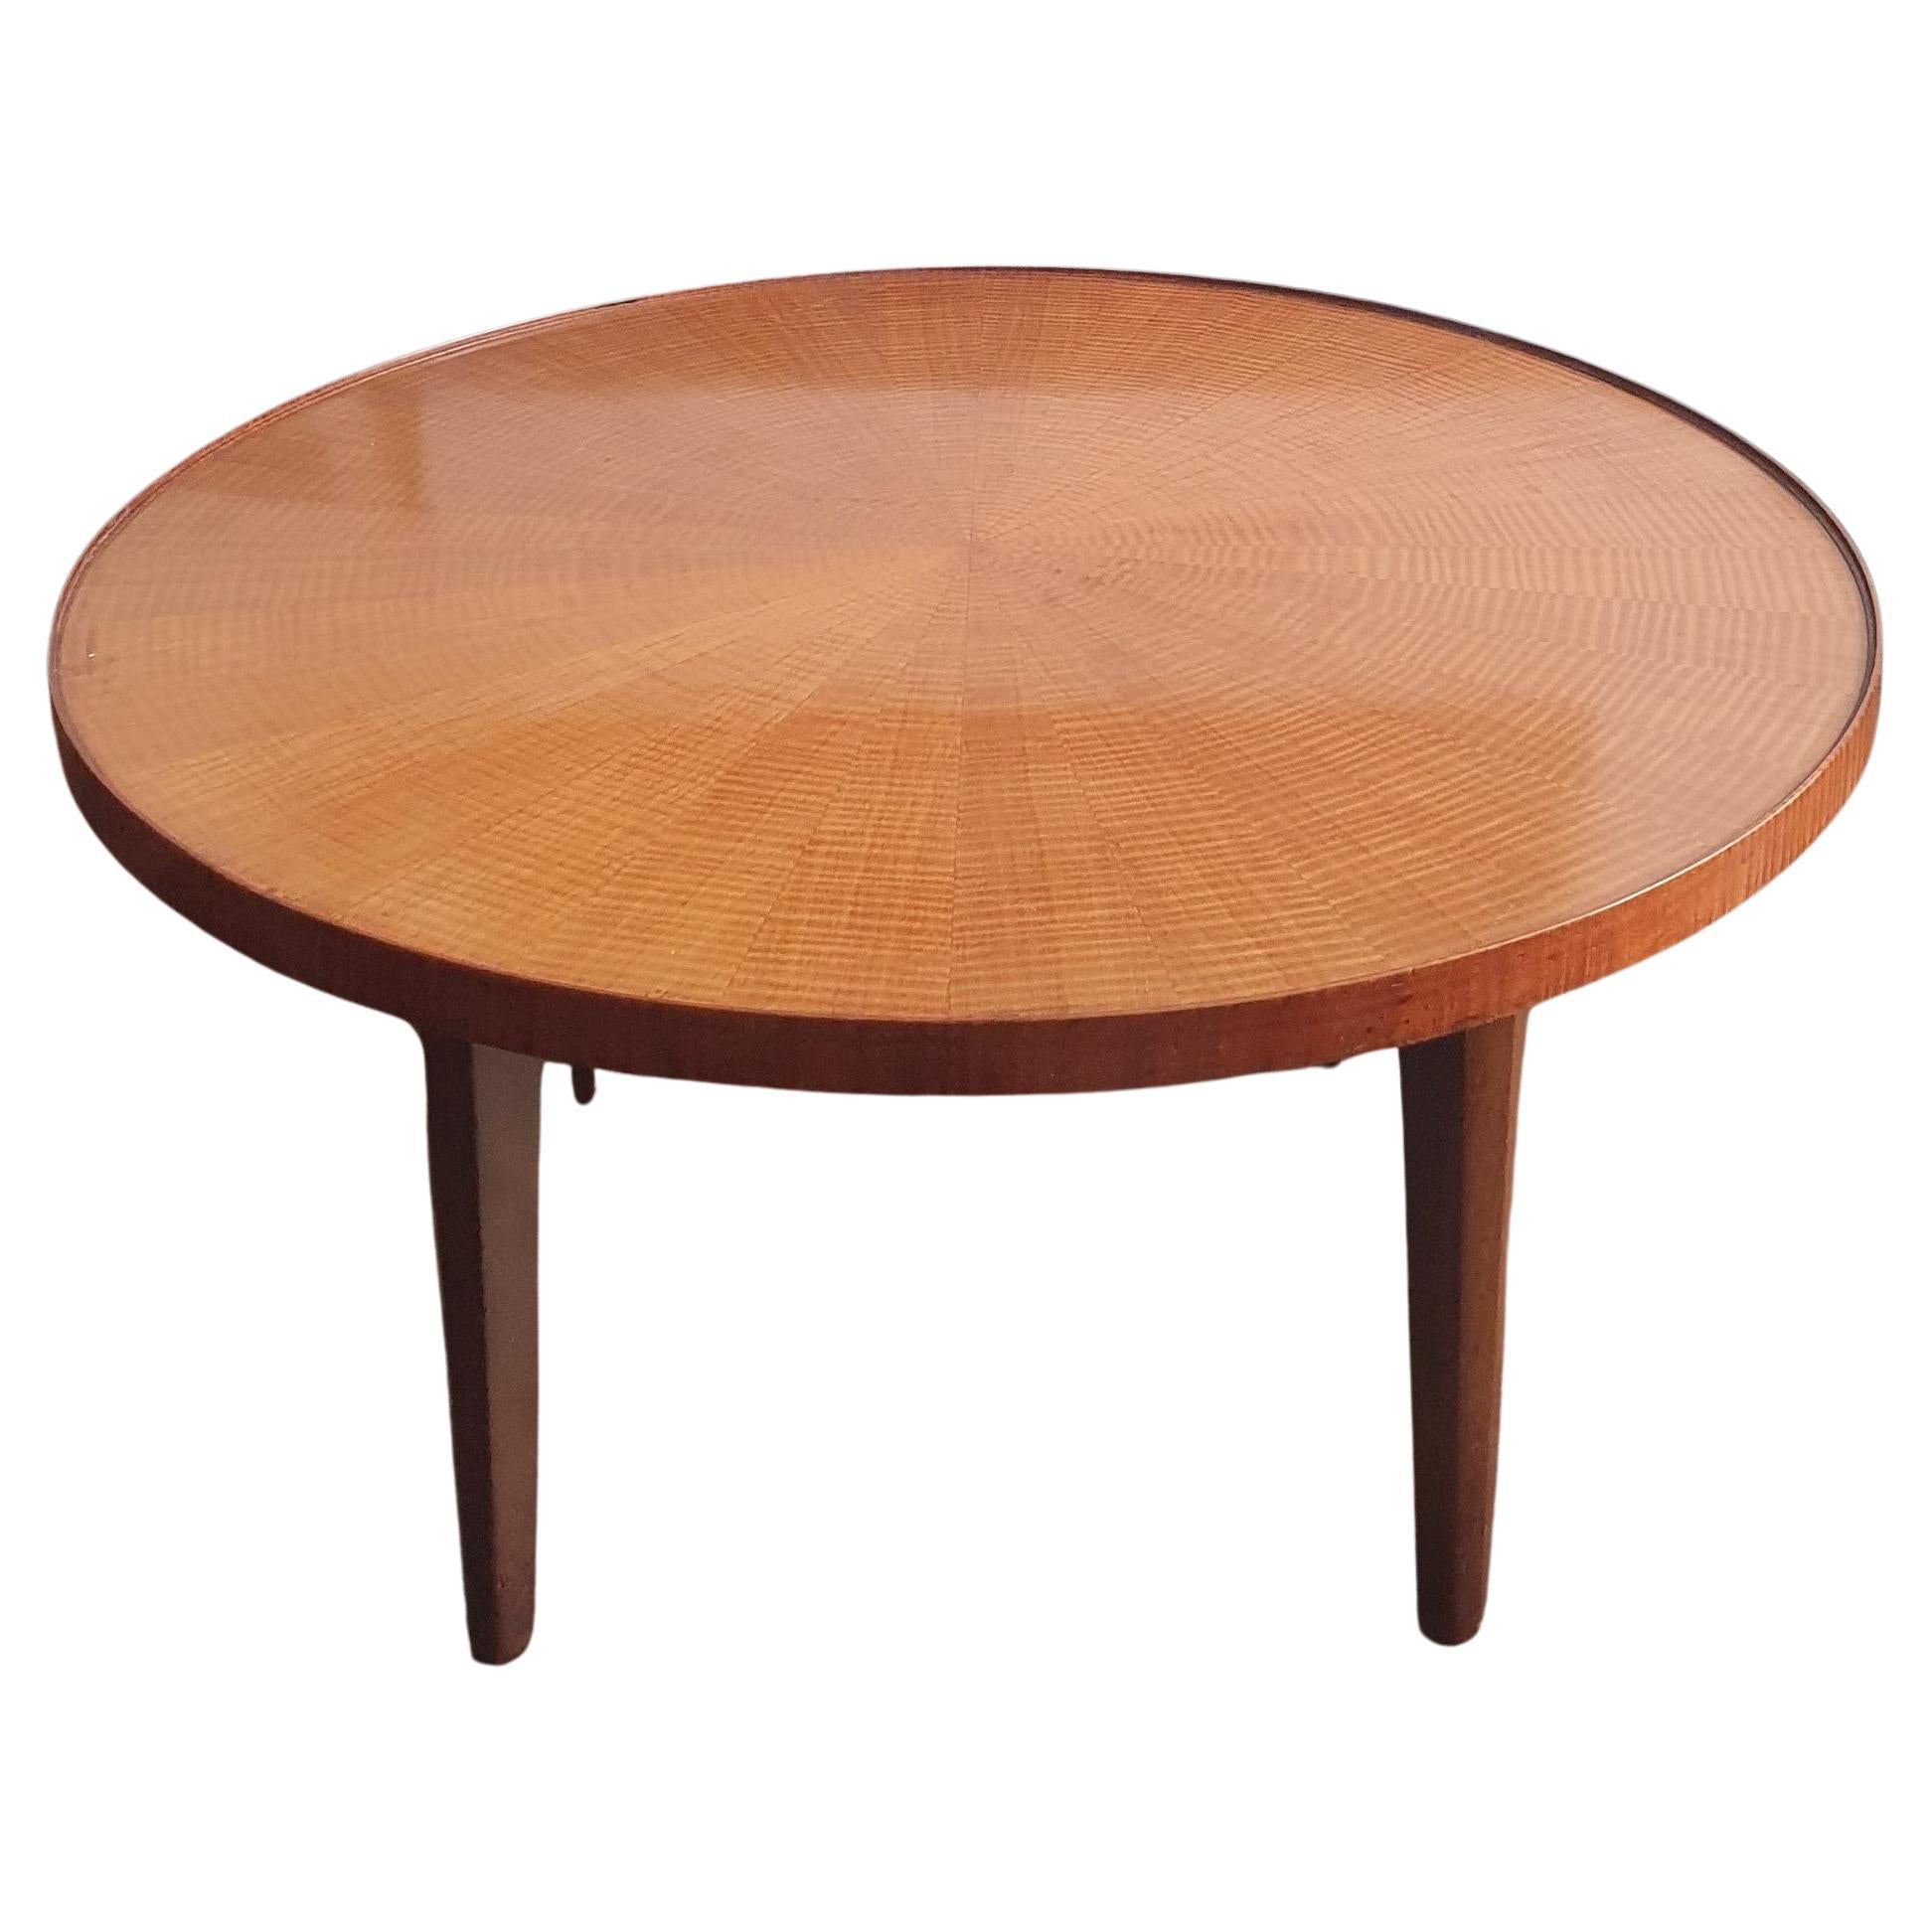 French Mid-Century Modern Coffee Table in Fiddled Sycamore For Sale